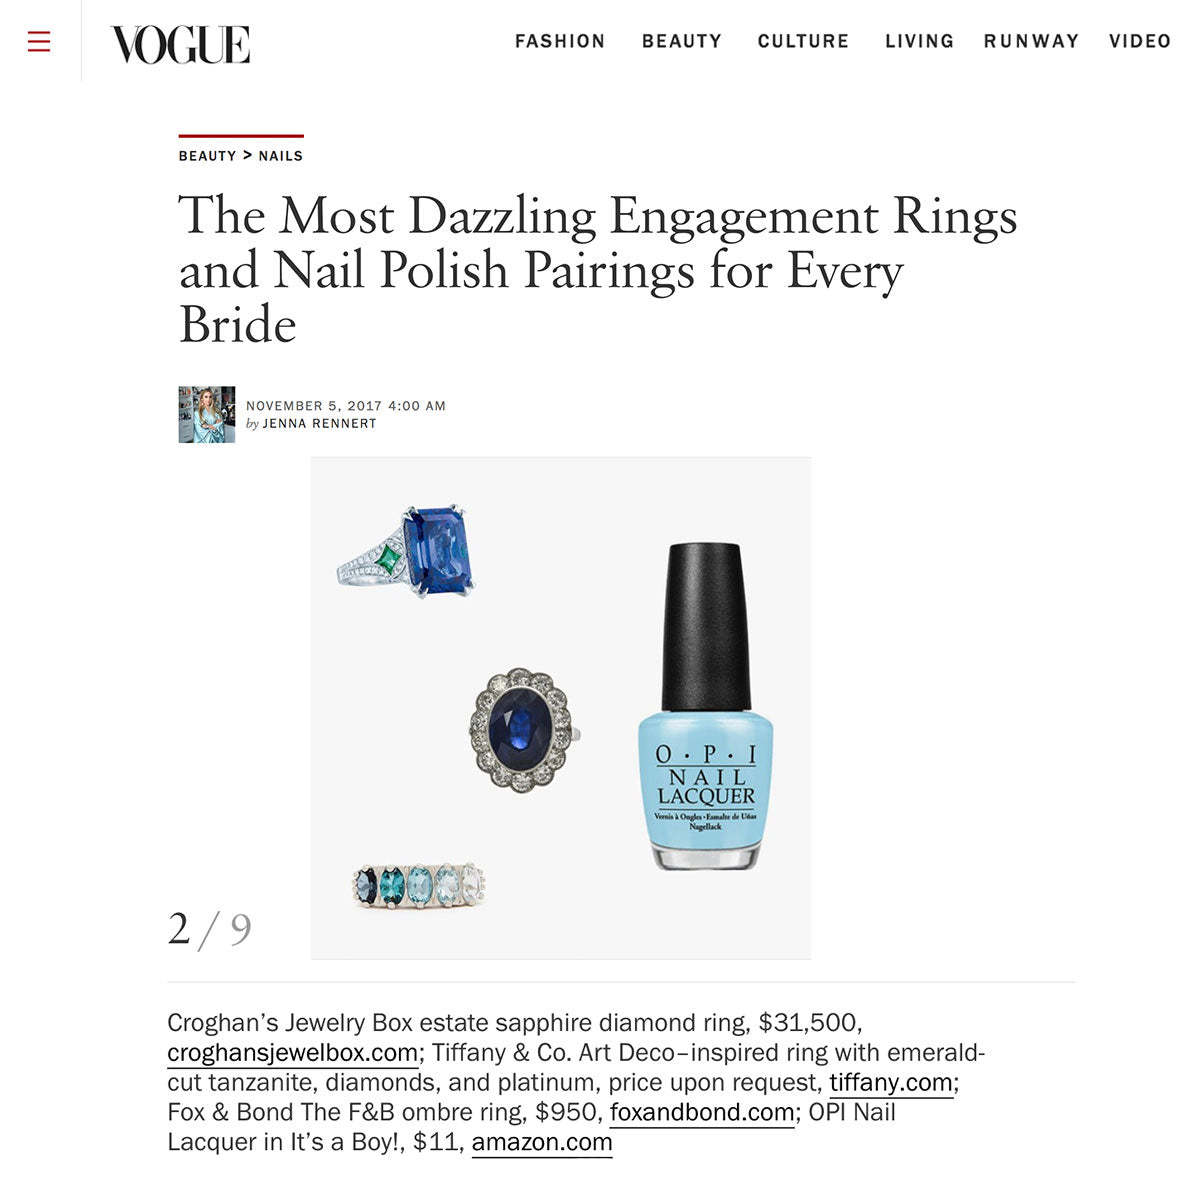 Vogue.com: The Most Dazzling Engagement Rings and Nail Polish Pairings for Every Bride